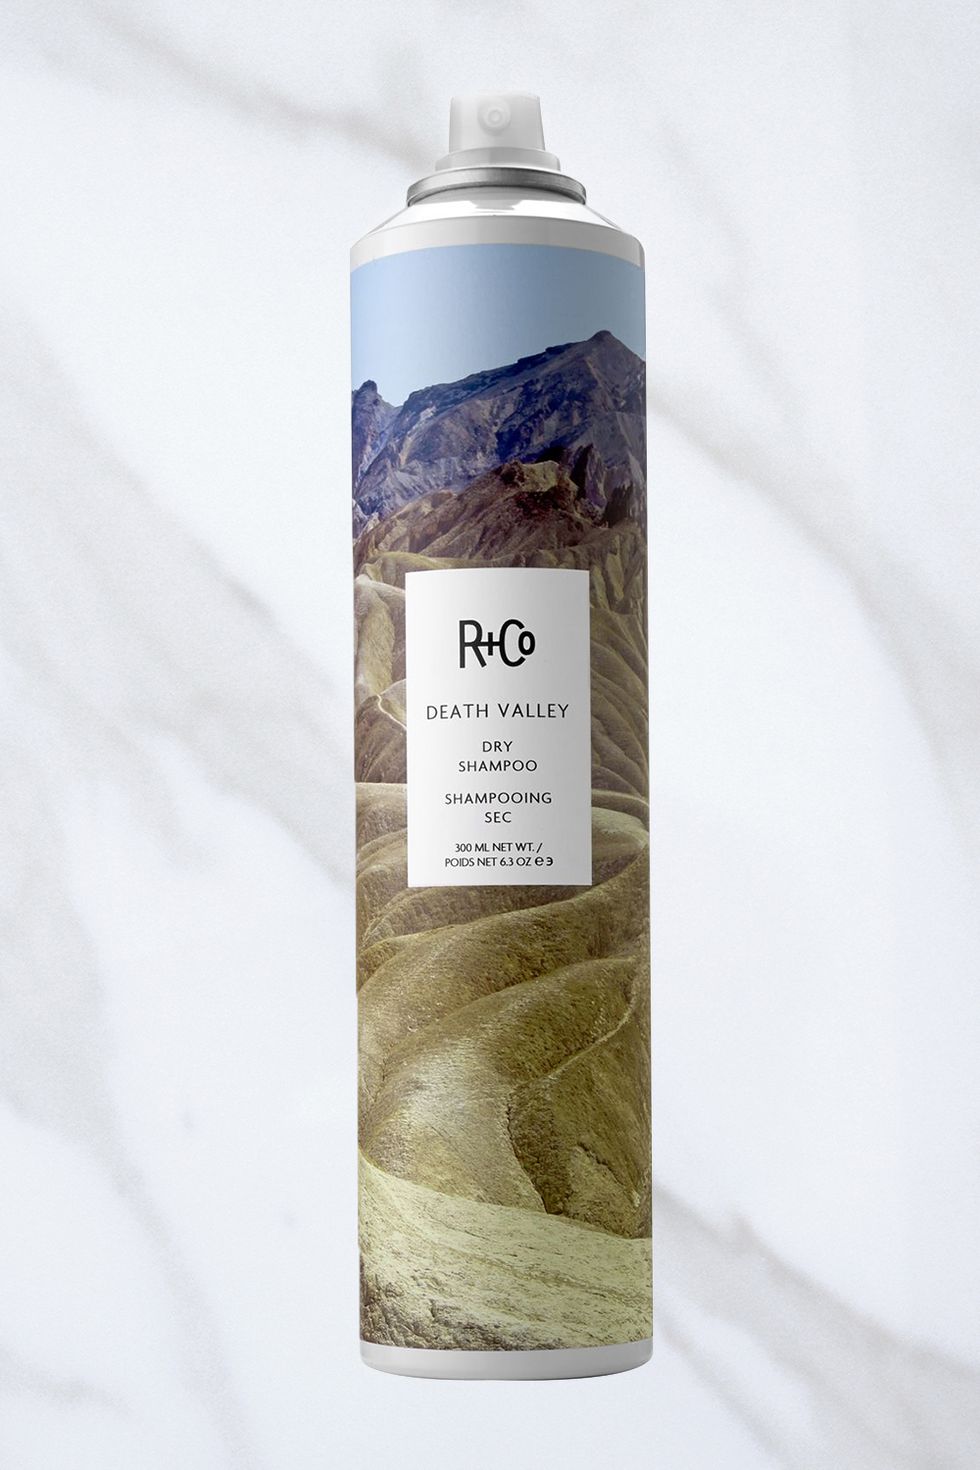 <p>No need to wash, condition, and the whole shebang before you chill with bae. Just spritz on <a href="http://www.randco.com/death-valley-dry-shampoo.html" target="_blank">R&Co Death Valley Dry Shampoo</a>, $29, to coax out texture and freshen up your hair before your guy arrives — or even the morning after. </p>